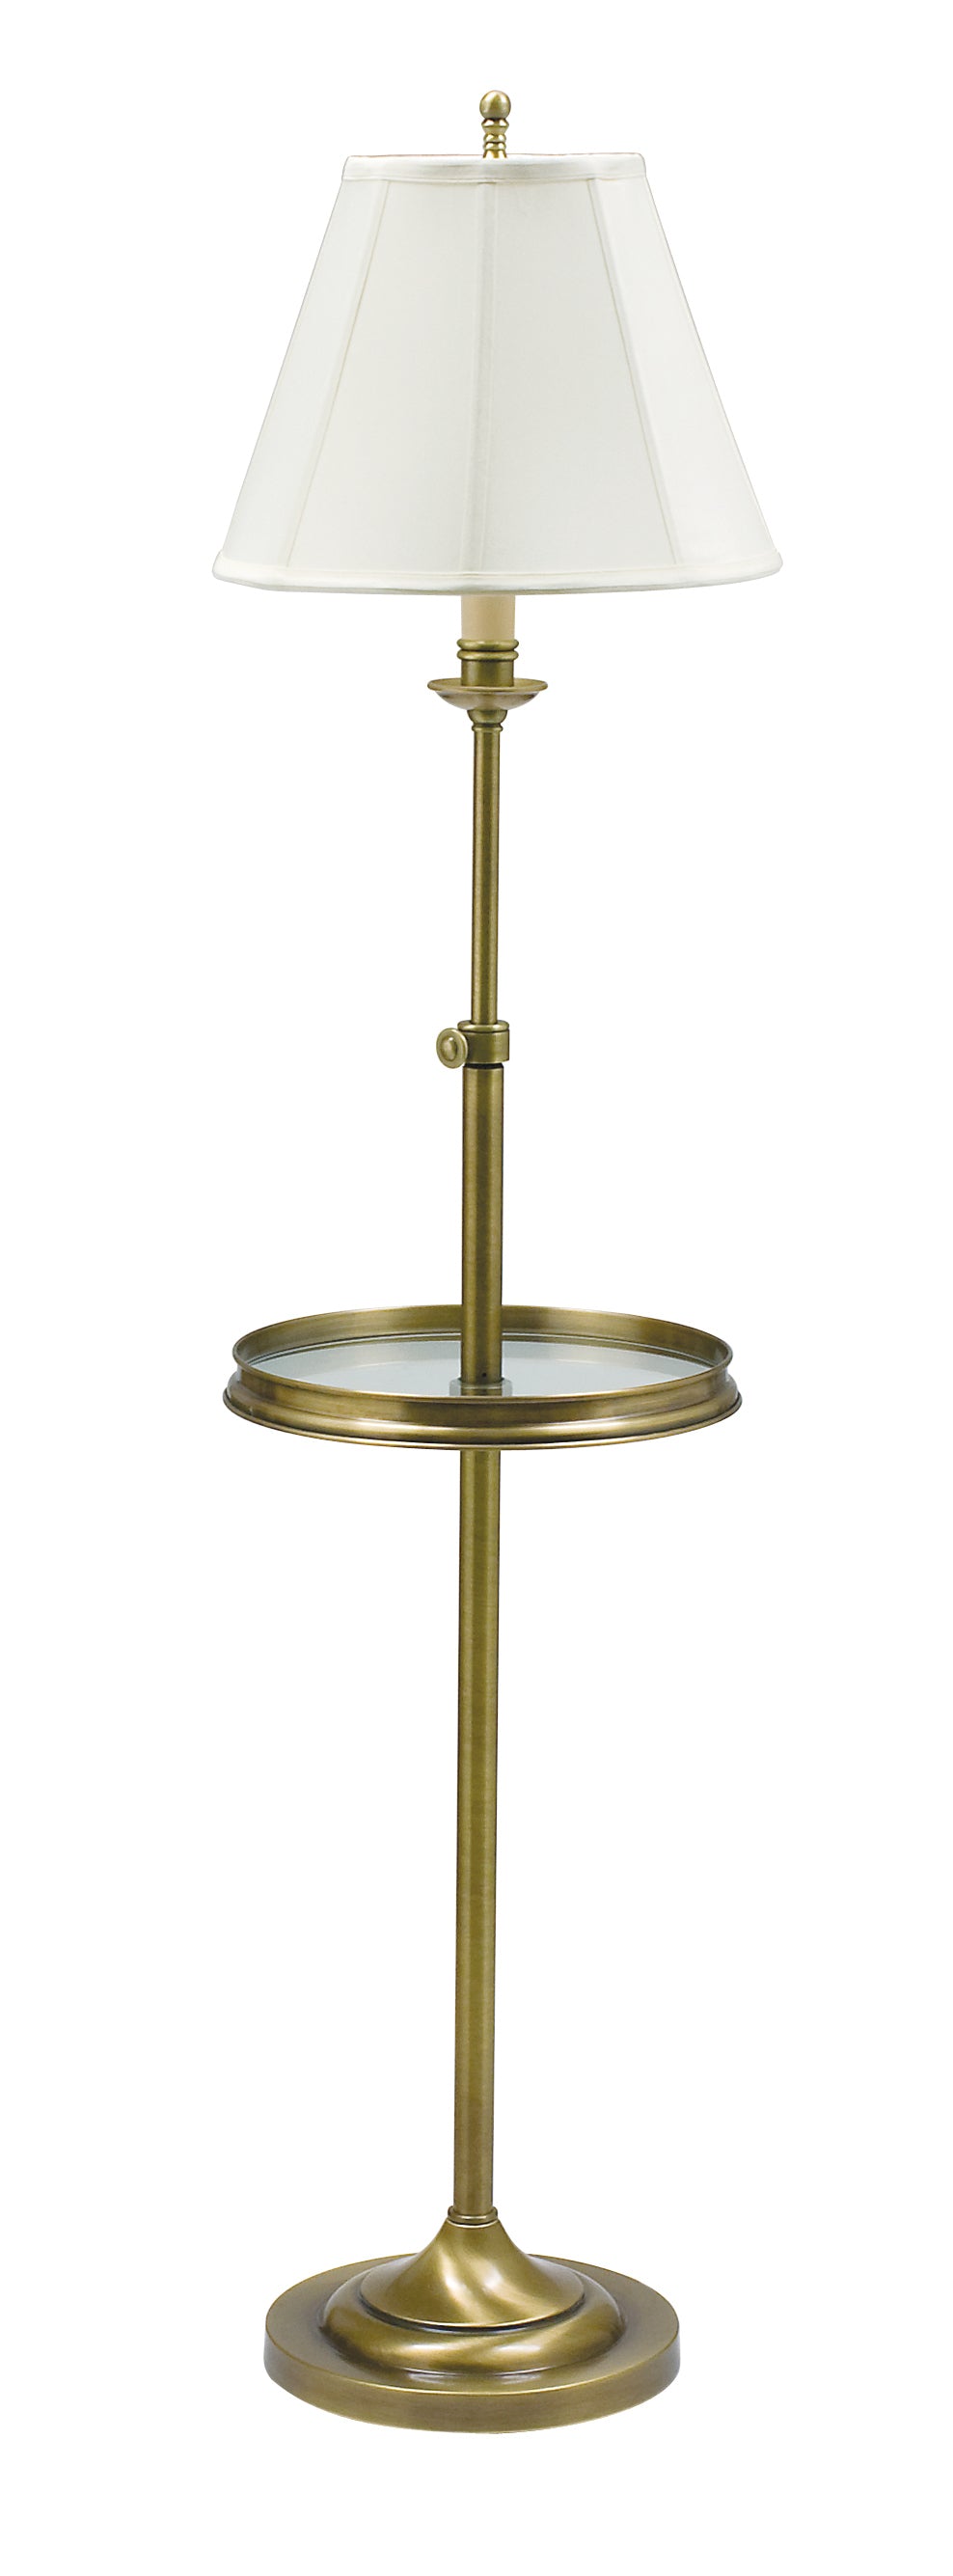 House of Troy Club Adjustable Antique Brass Floor Lamp with glass table CL202-AB